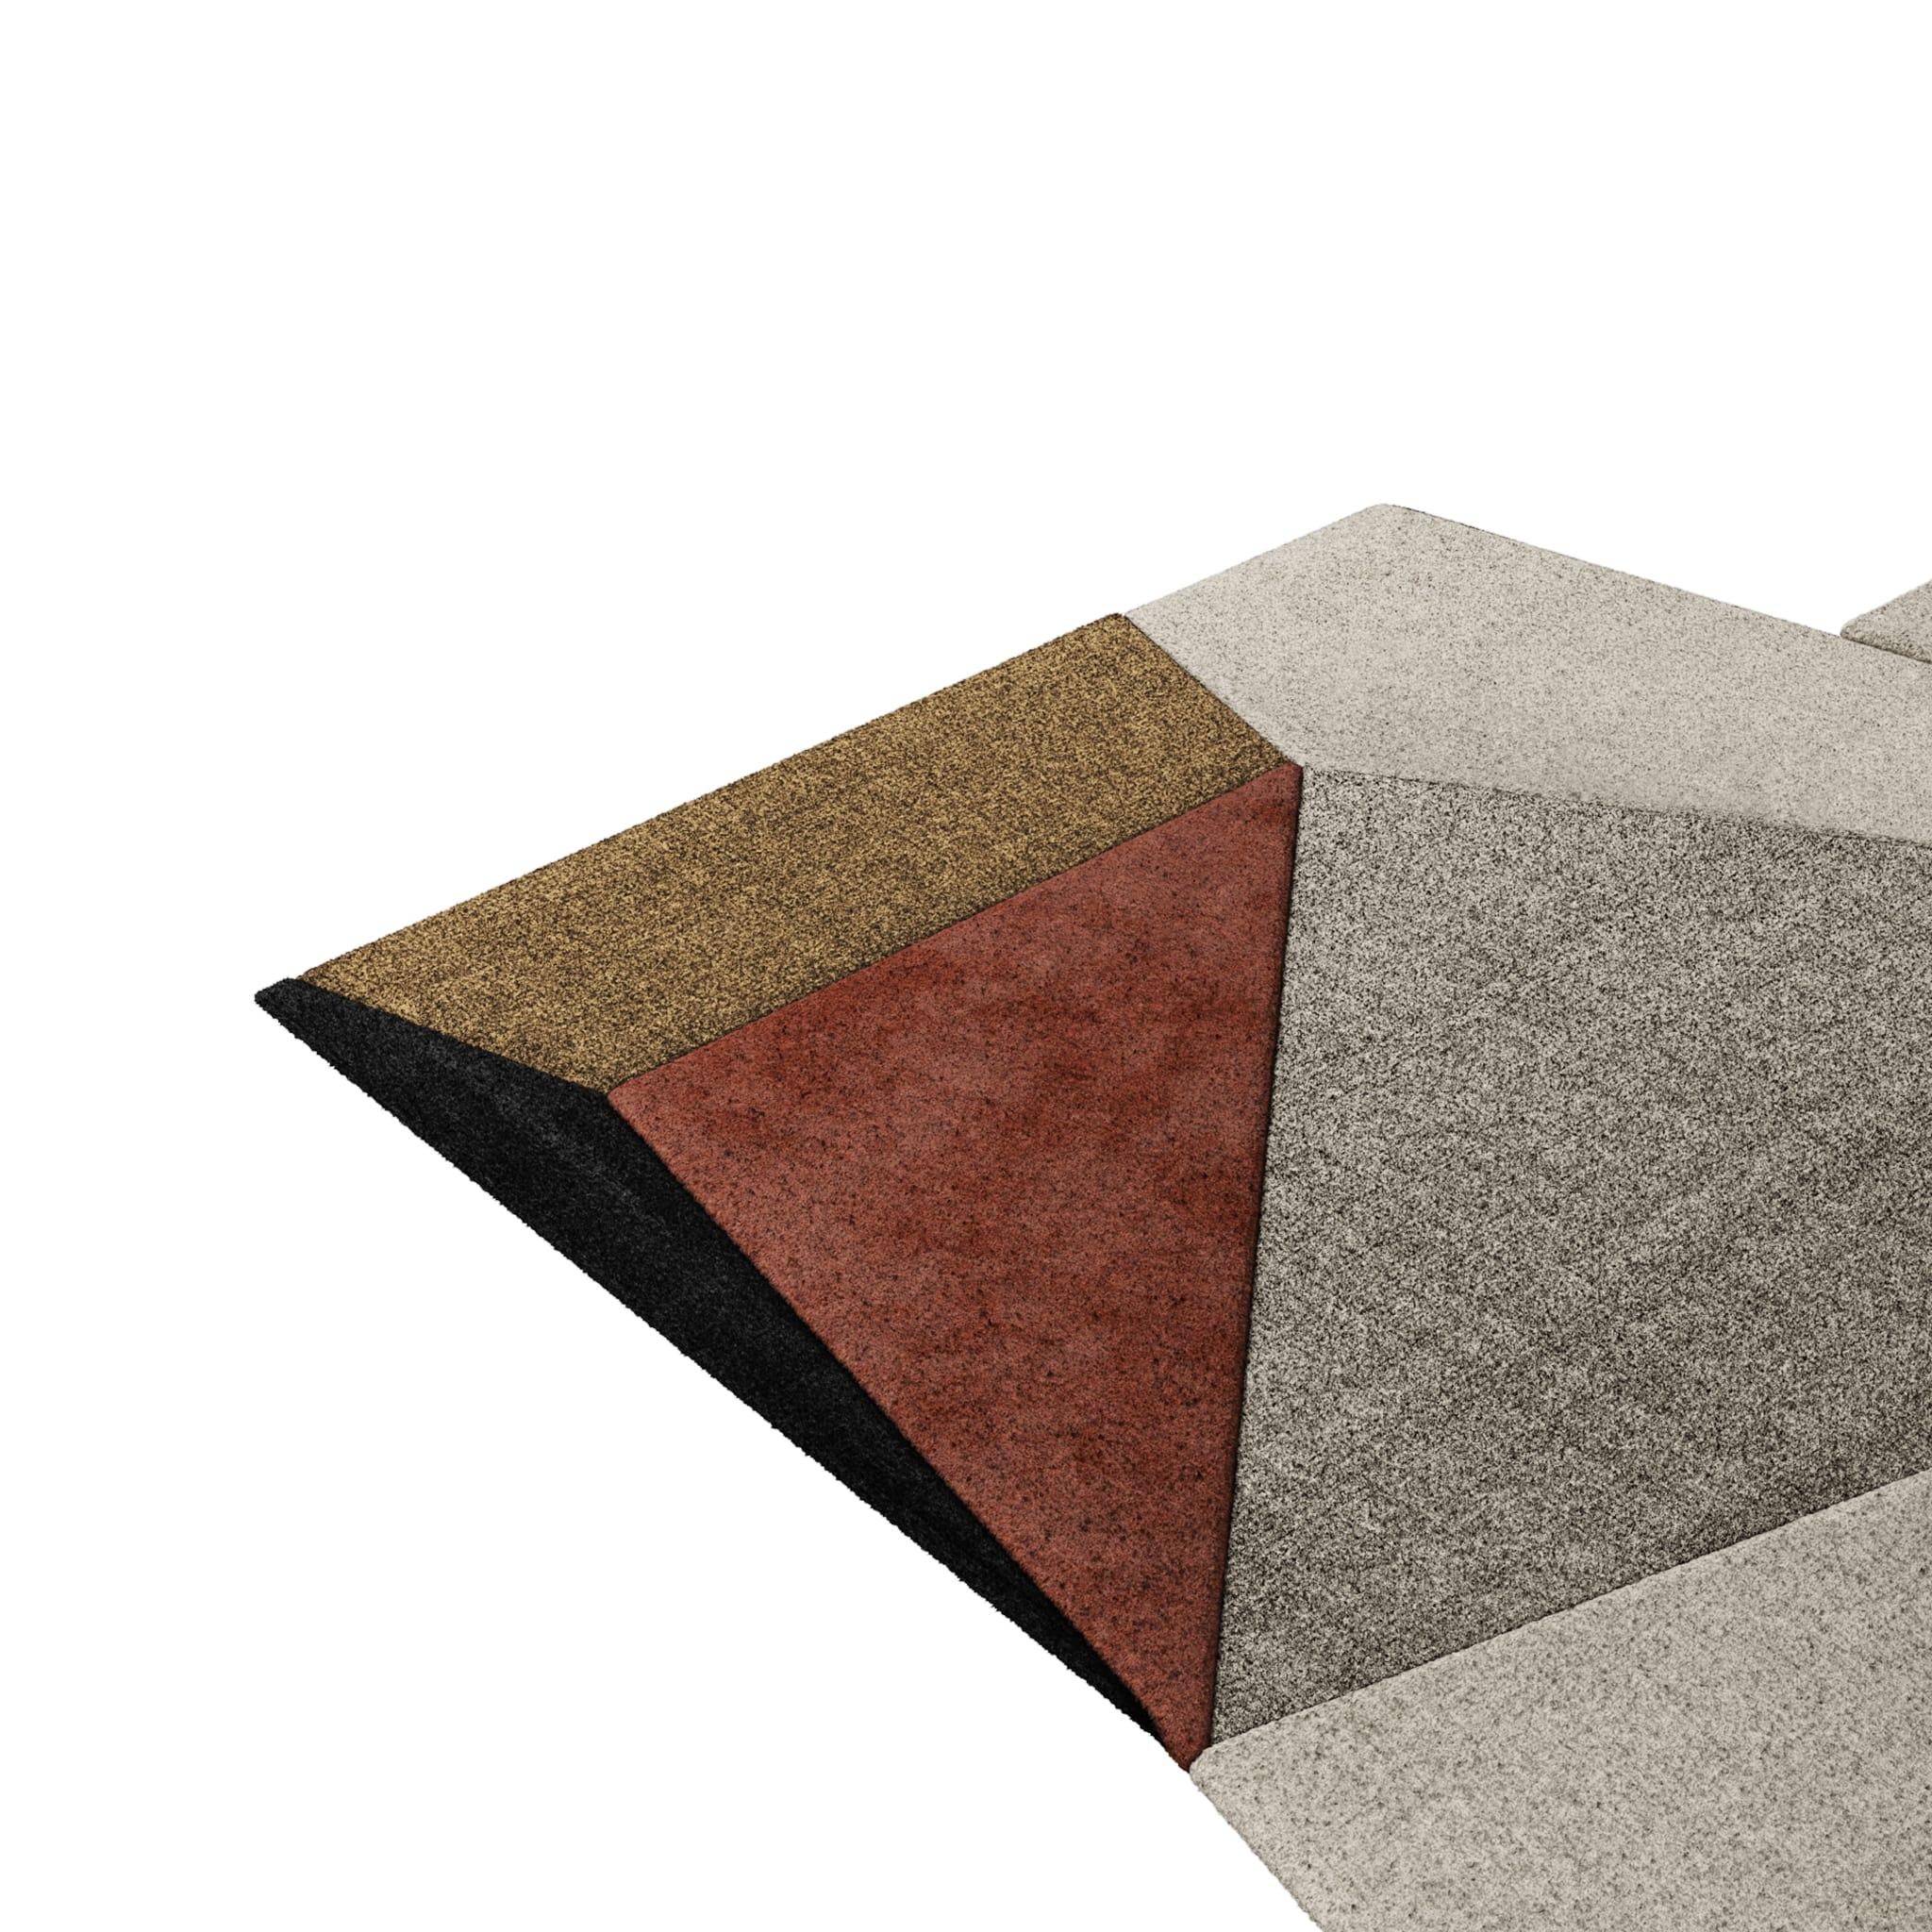 Tapis Retro #001 is a retro rug with an irregular shape and neutral colors. Inspired by architectural lines, this recto rug makes a statement in any living space. 

Using a 3D-tufted technique that combines cut and loop pile, the retro rug with